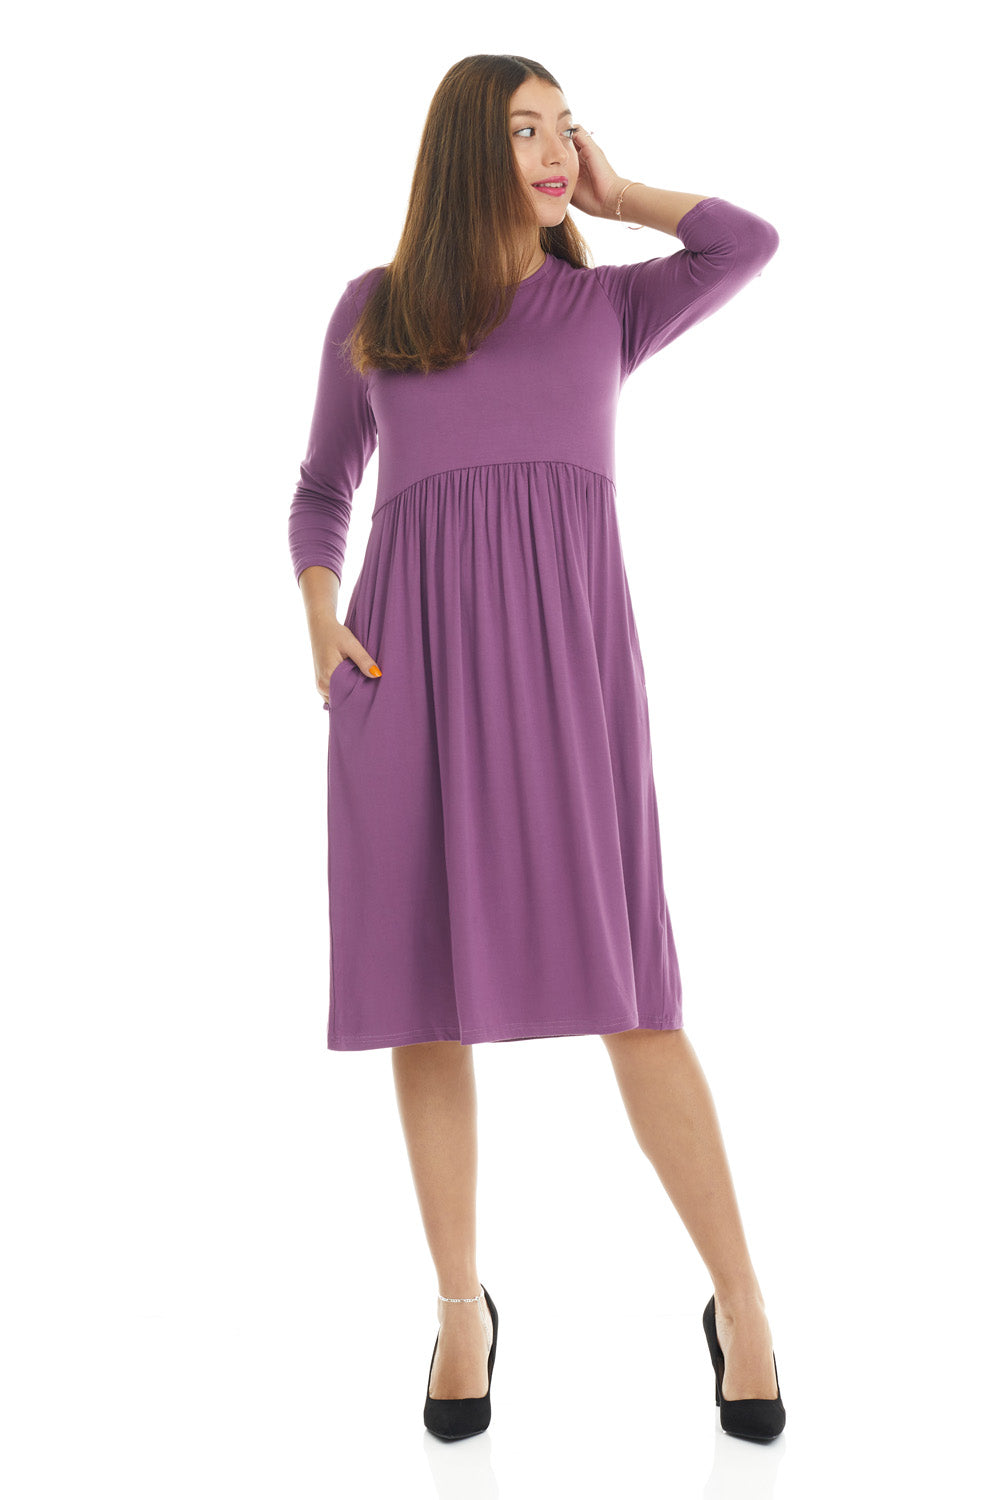 modest 3/4 sleeve babydoll, swing dress with pockets